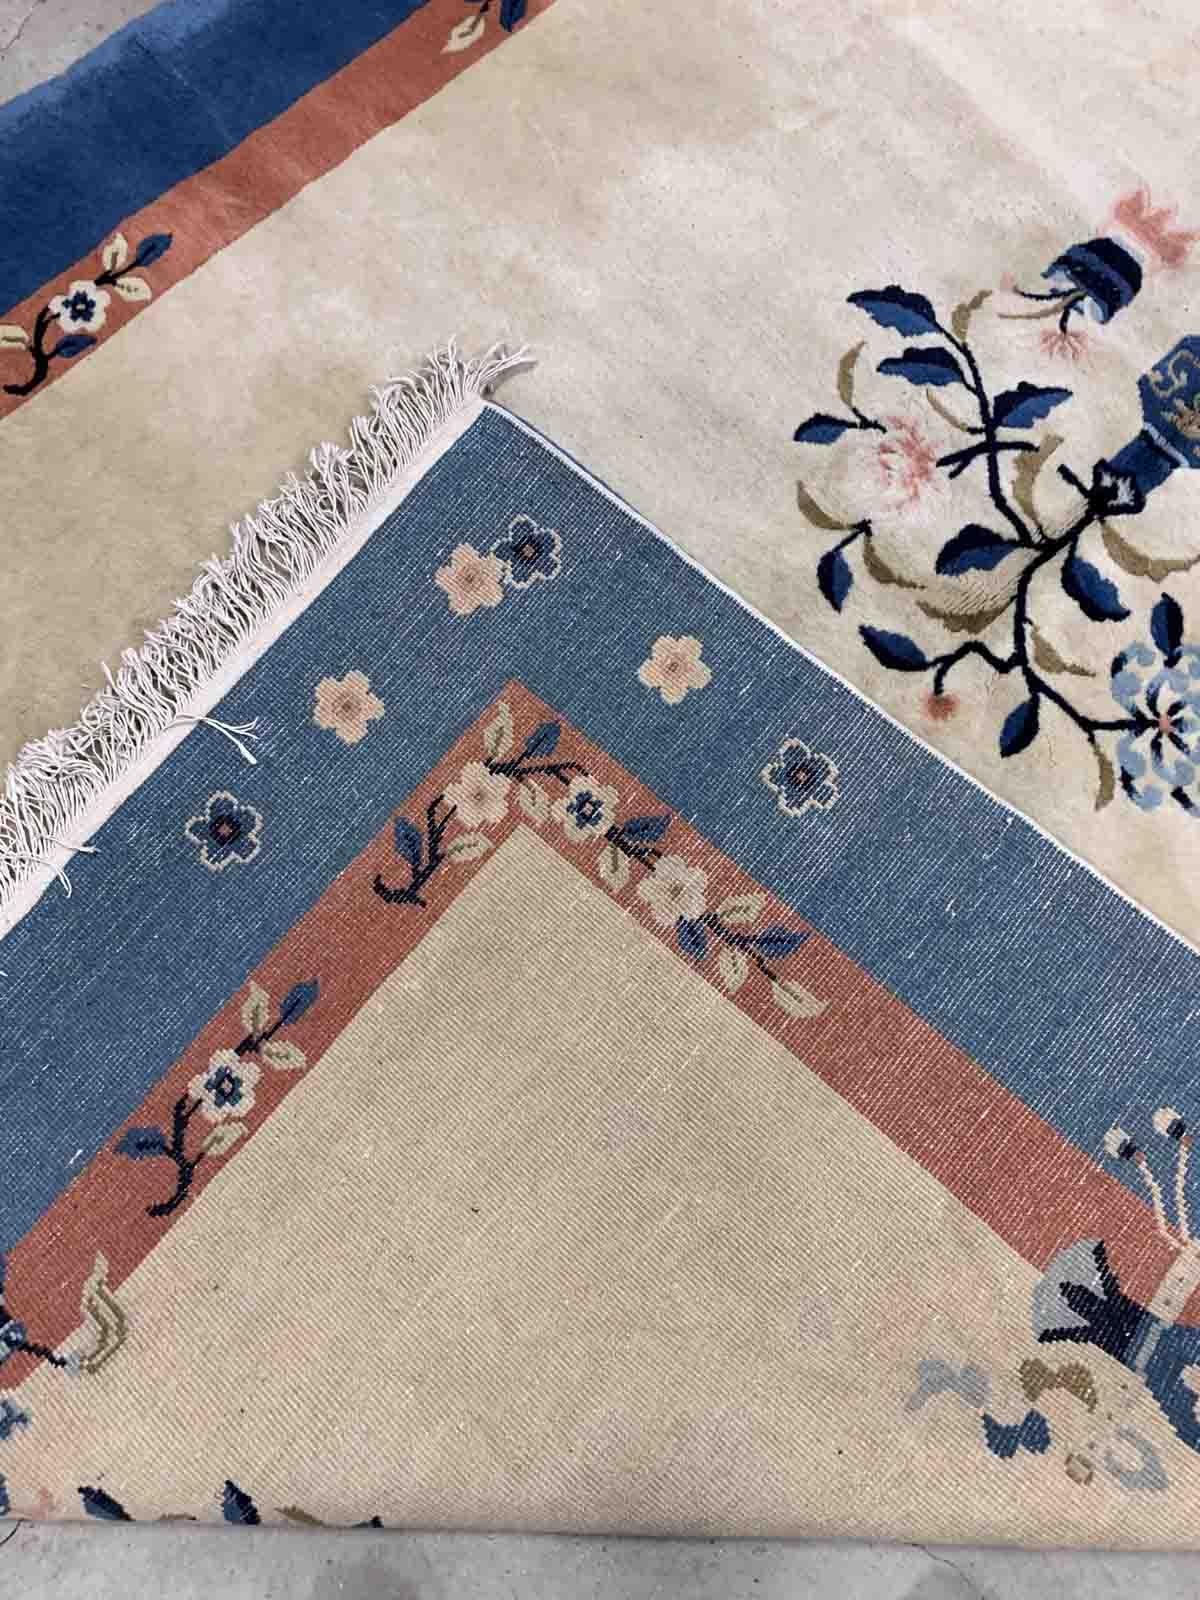 Handmade vintage Art Deco Chinese rug in beige and blue shades. The rug is from the beginning of 20th century in original good condition. 

-condition: original good,

-circa: 1930s,

-size: 5.1' x 8.1' (155cm x 247cm),
?
-material: